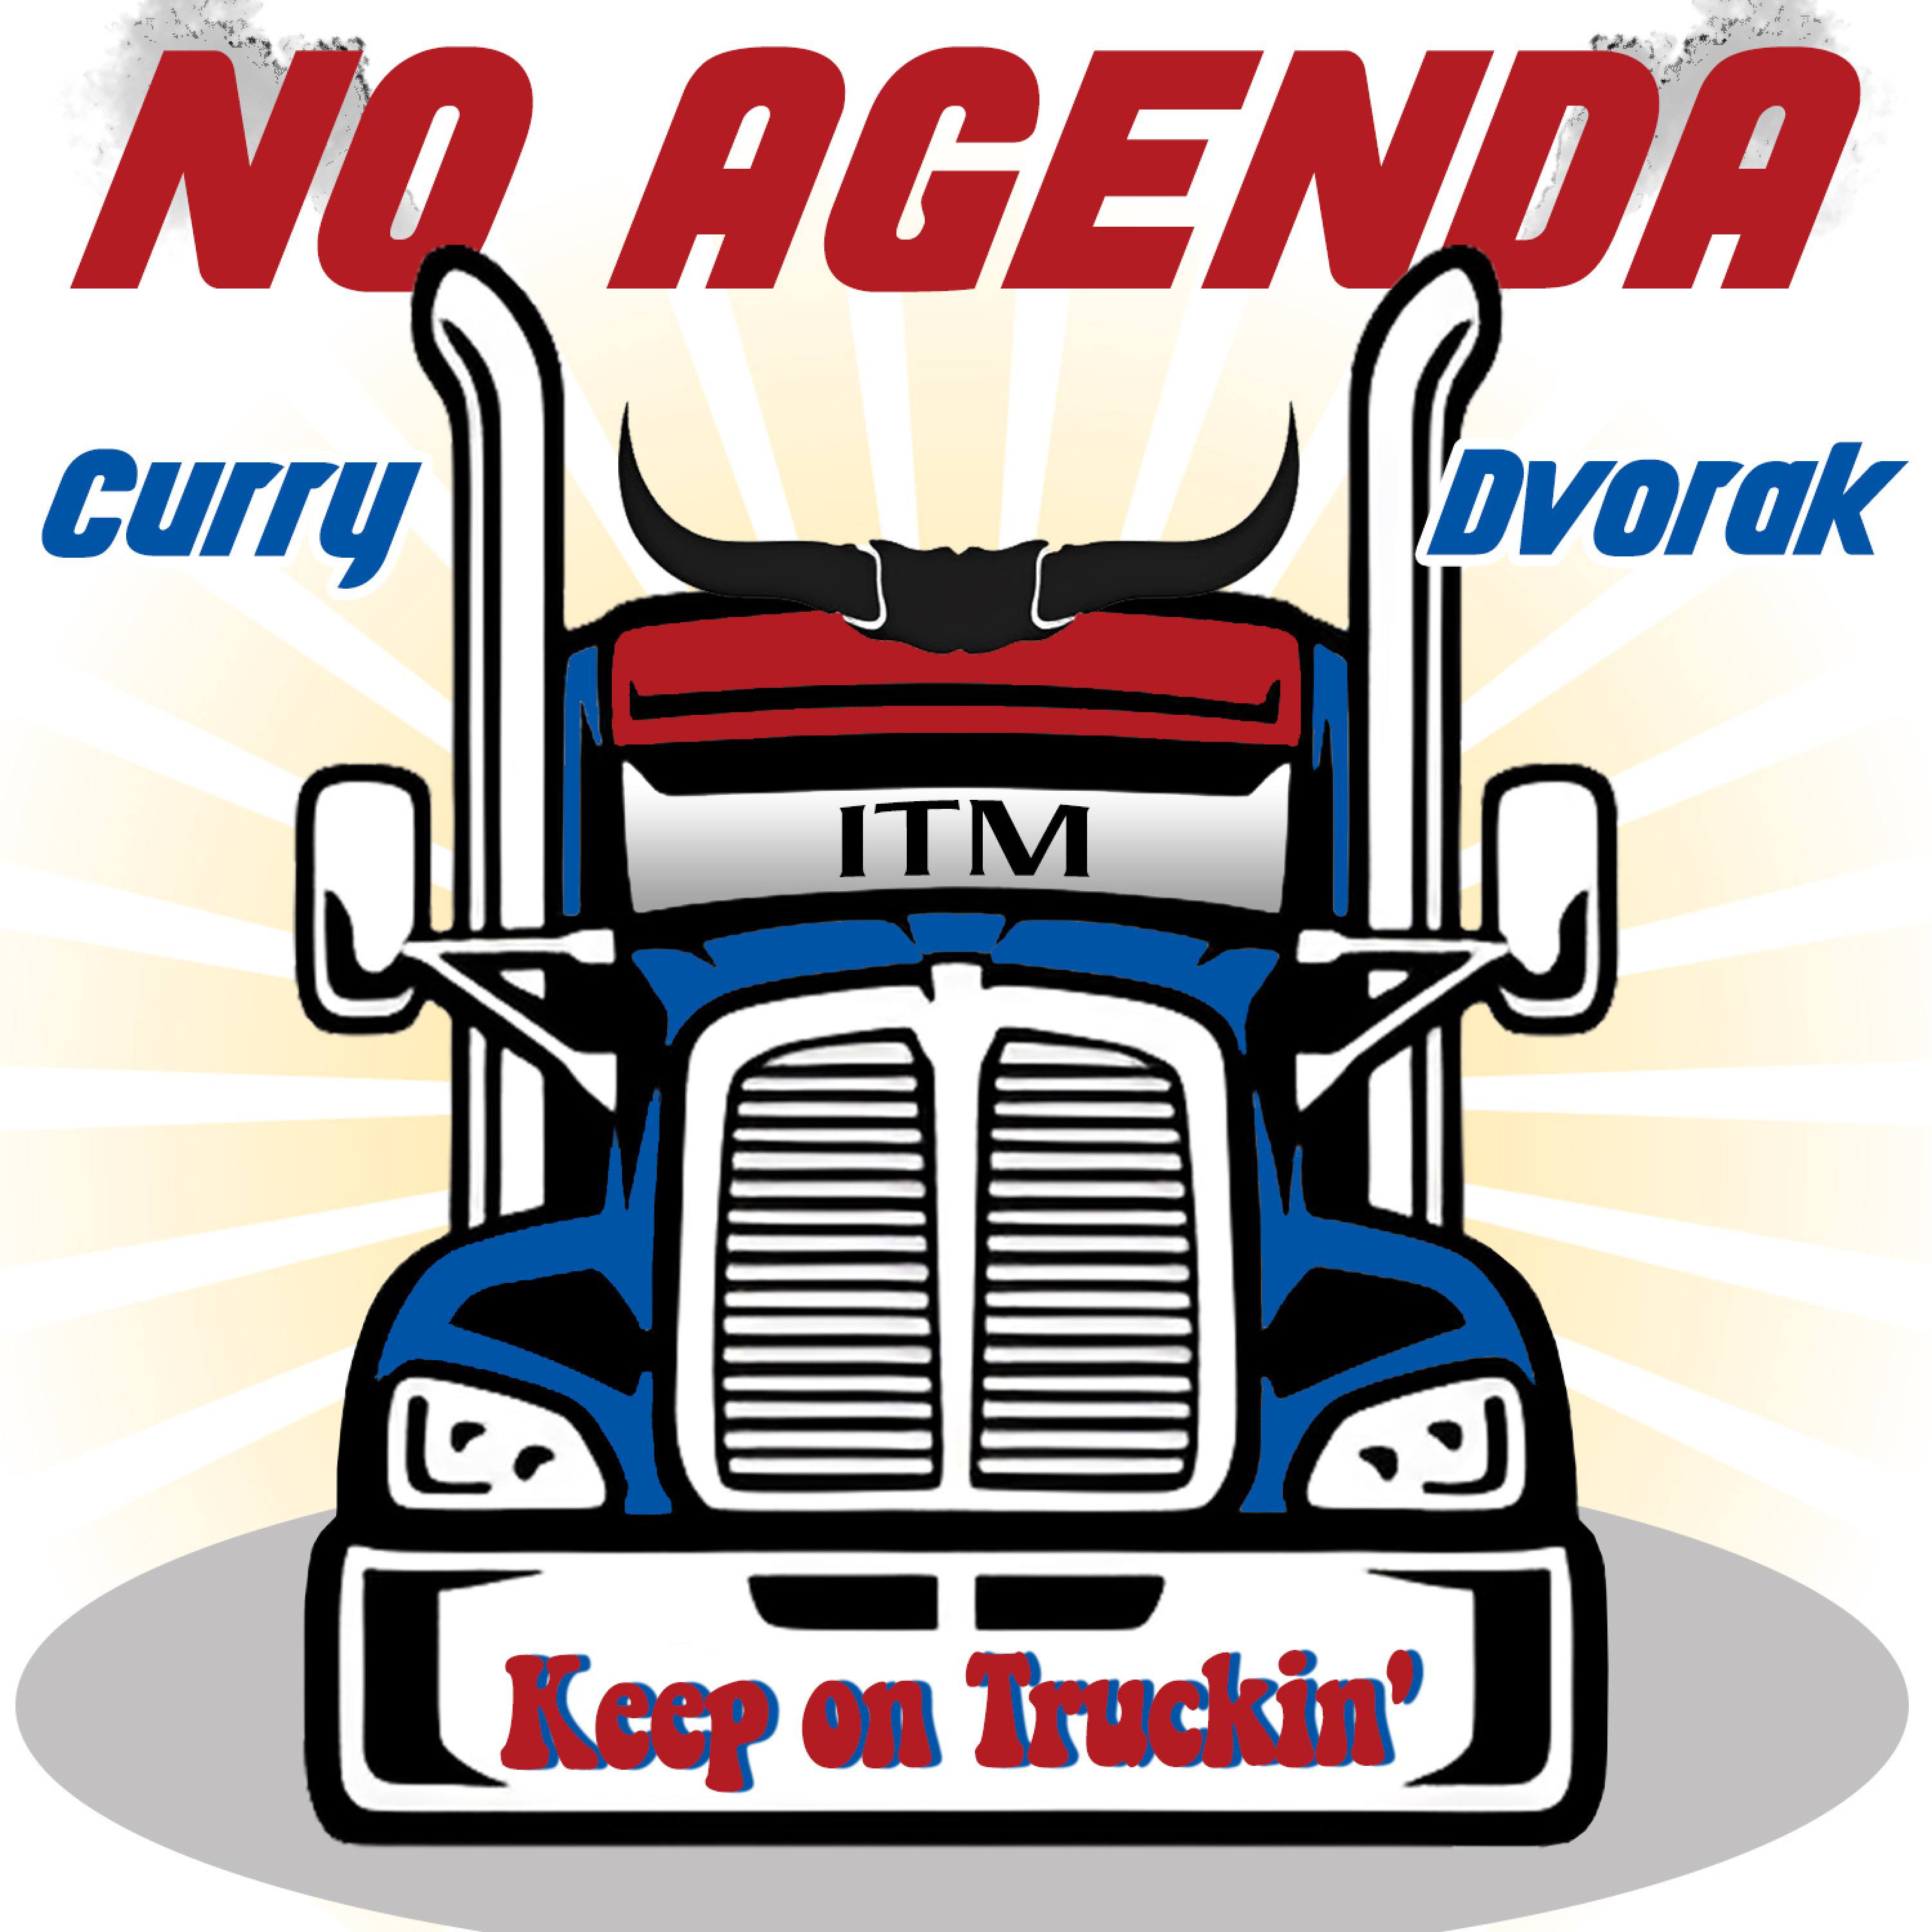 Keep on Truckin' by nessworks for 